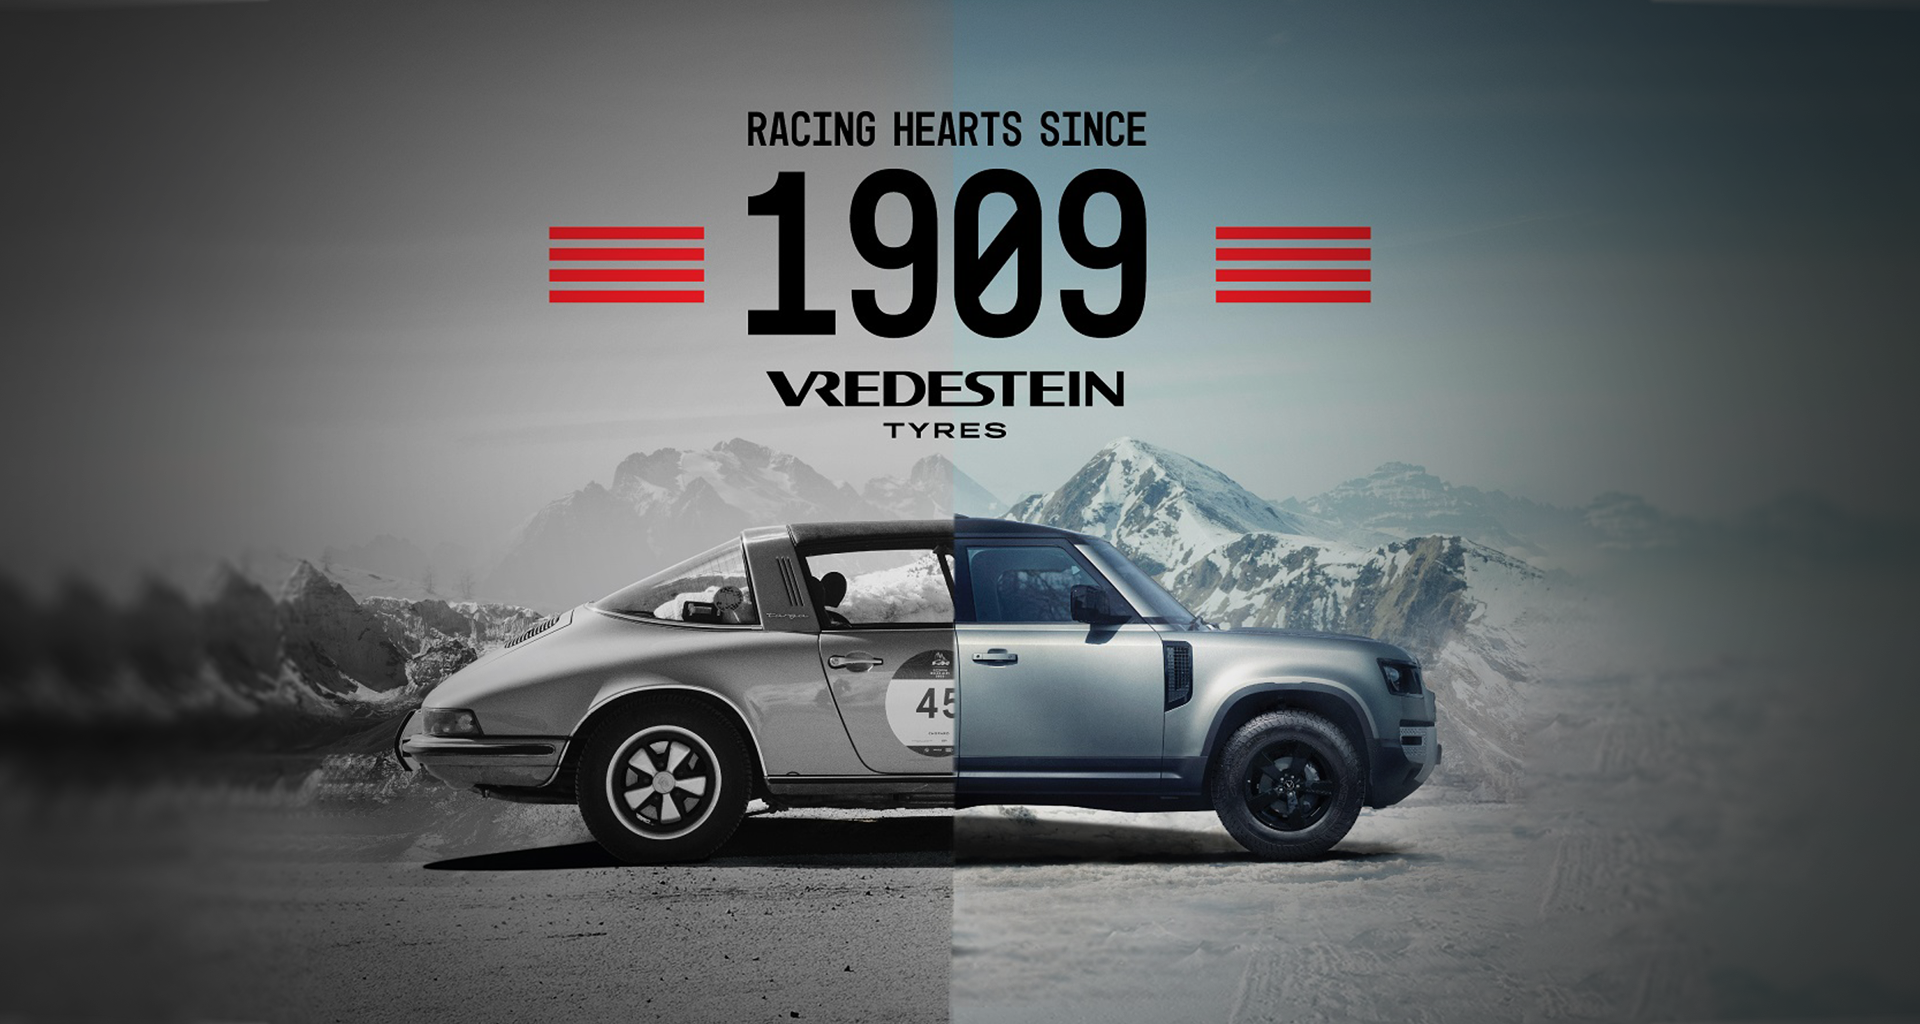 Apollo Tyres’ new campaign for Vredestein to get your Heart Racing